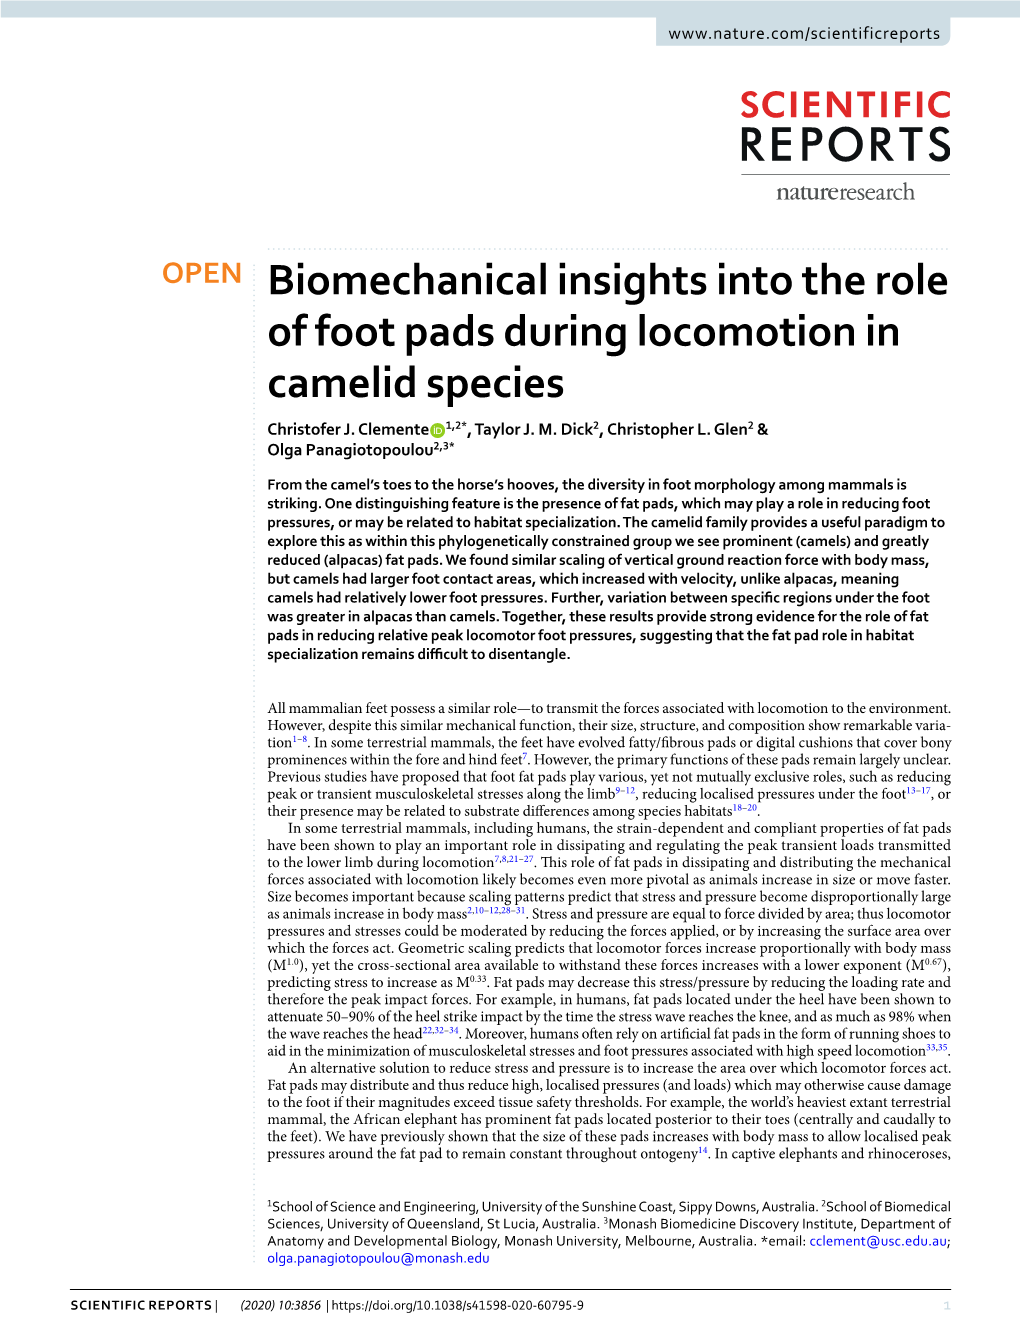 Biomechanical Insights Into the Role of Foot Pads During Locomotion in Camelid Species Christofer J